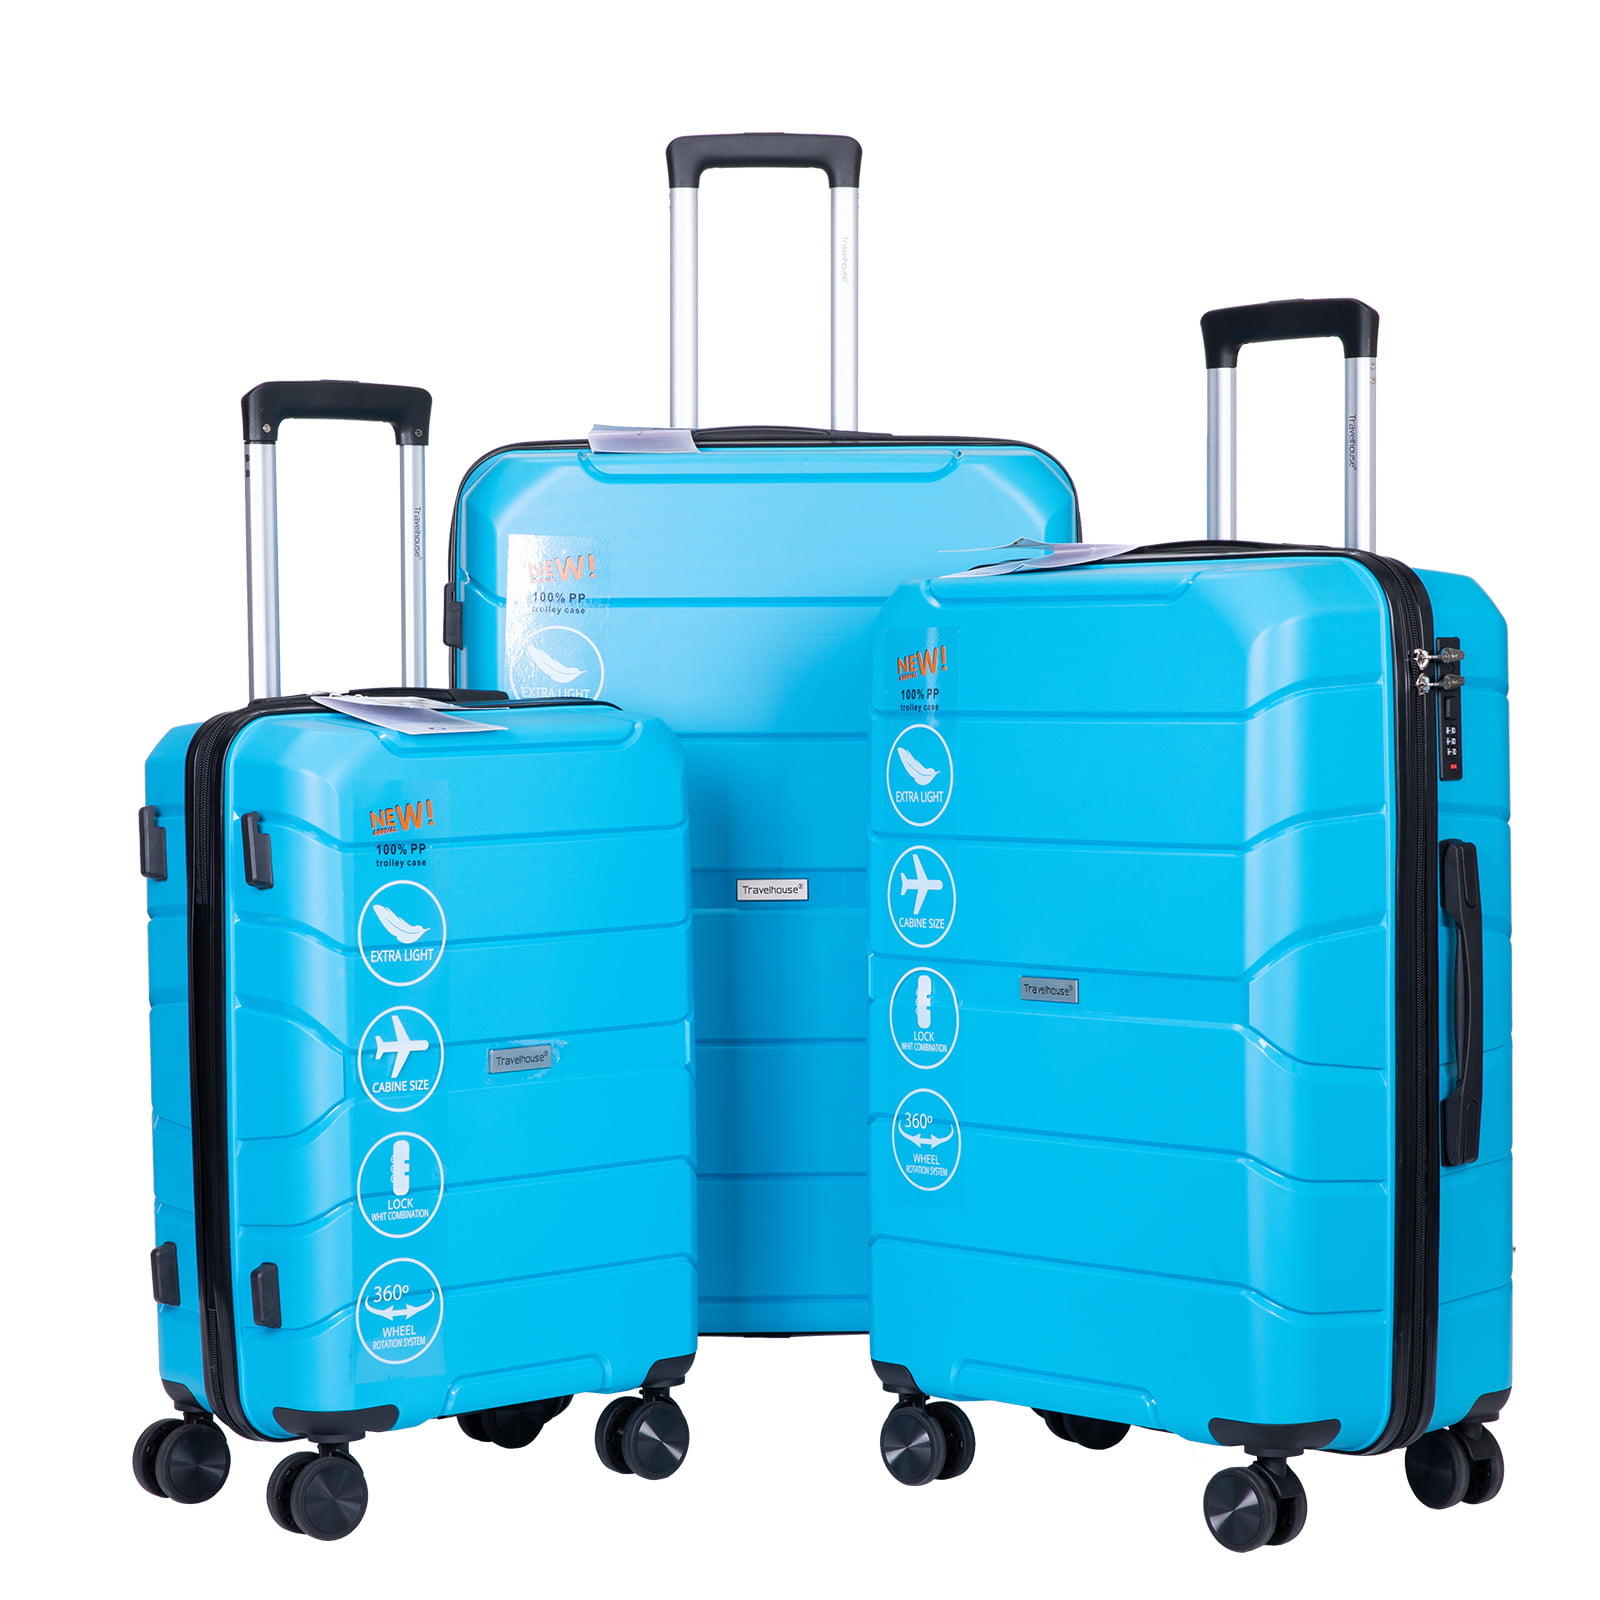 Travelhouse 3 Piece Luggage Set Hardshell Lightweight Suitcase with TSA Lock Spinner Wheels 20in24in28in.(Sky Blue)